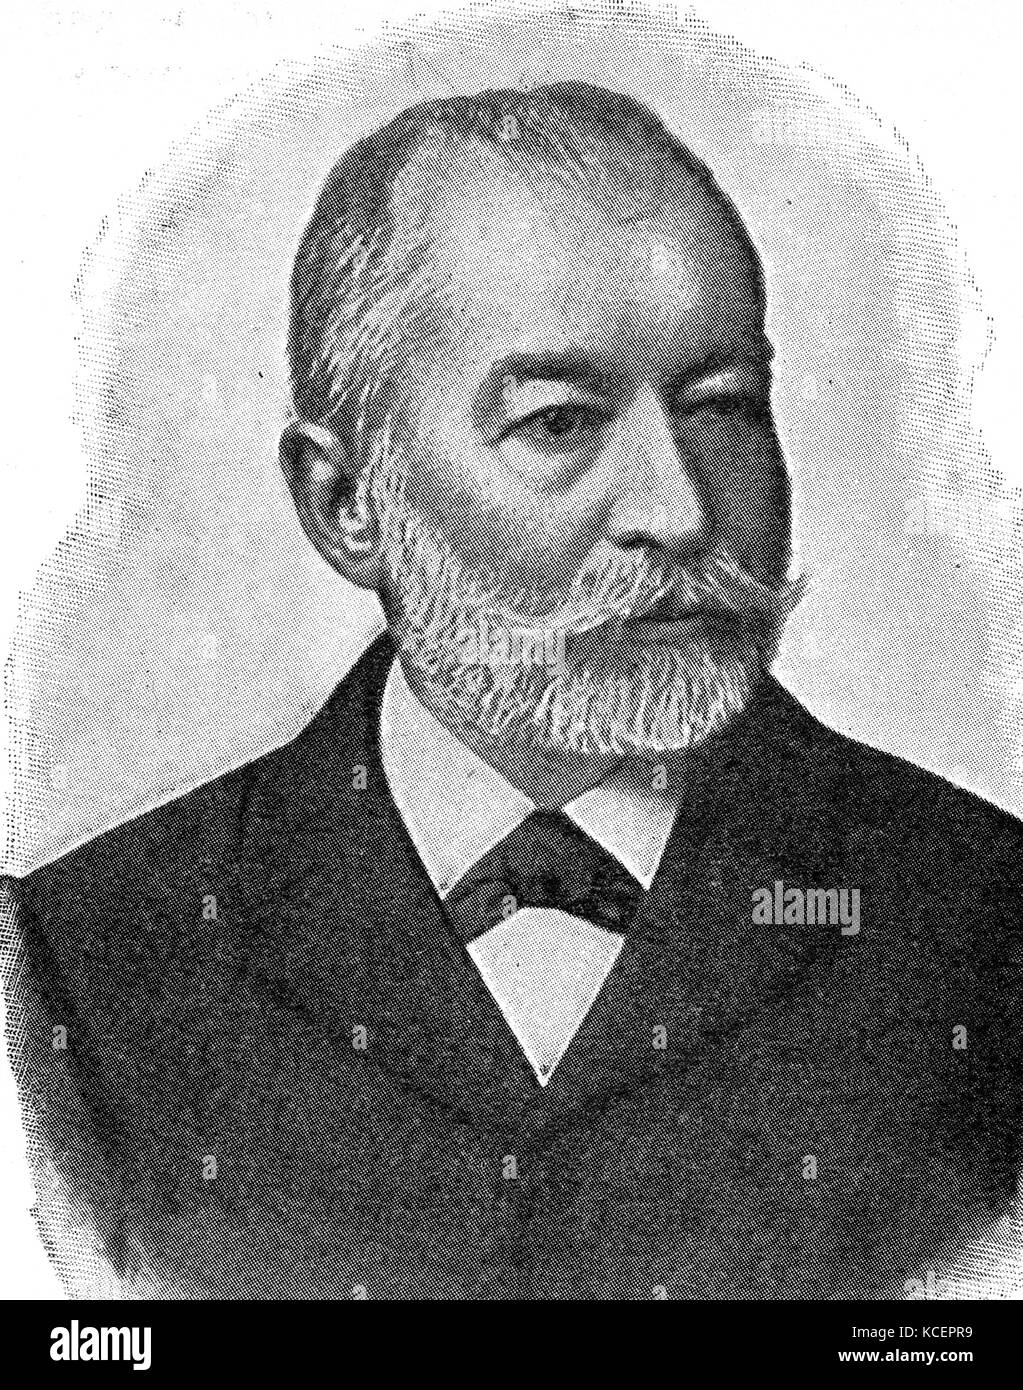 Portrait of Dimitrie Sturdza (1833-1914) a Romanian statesman and author. Dated 19th Century Stock Photo